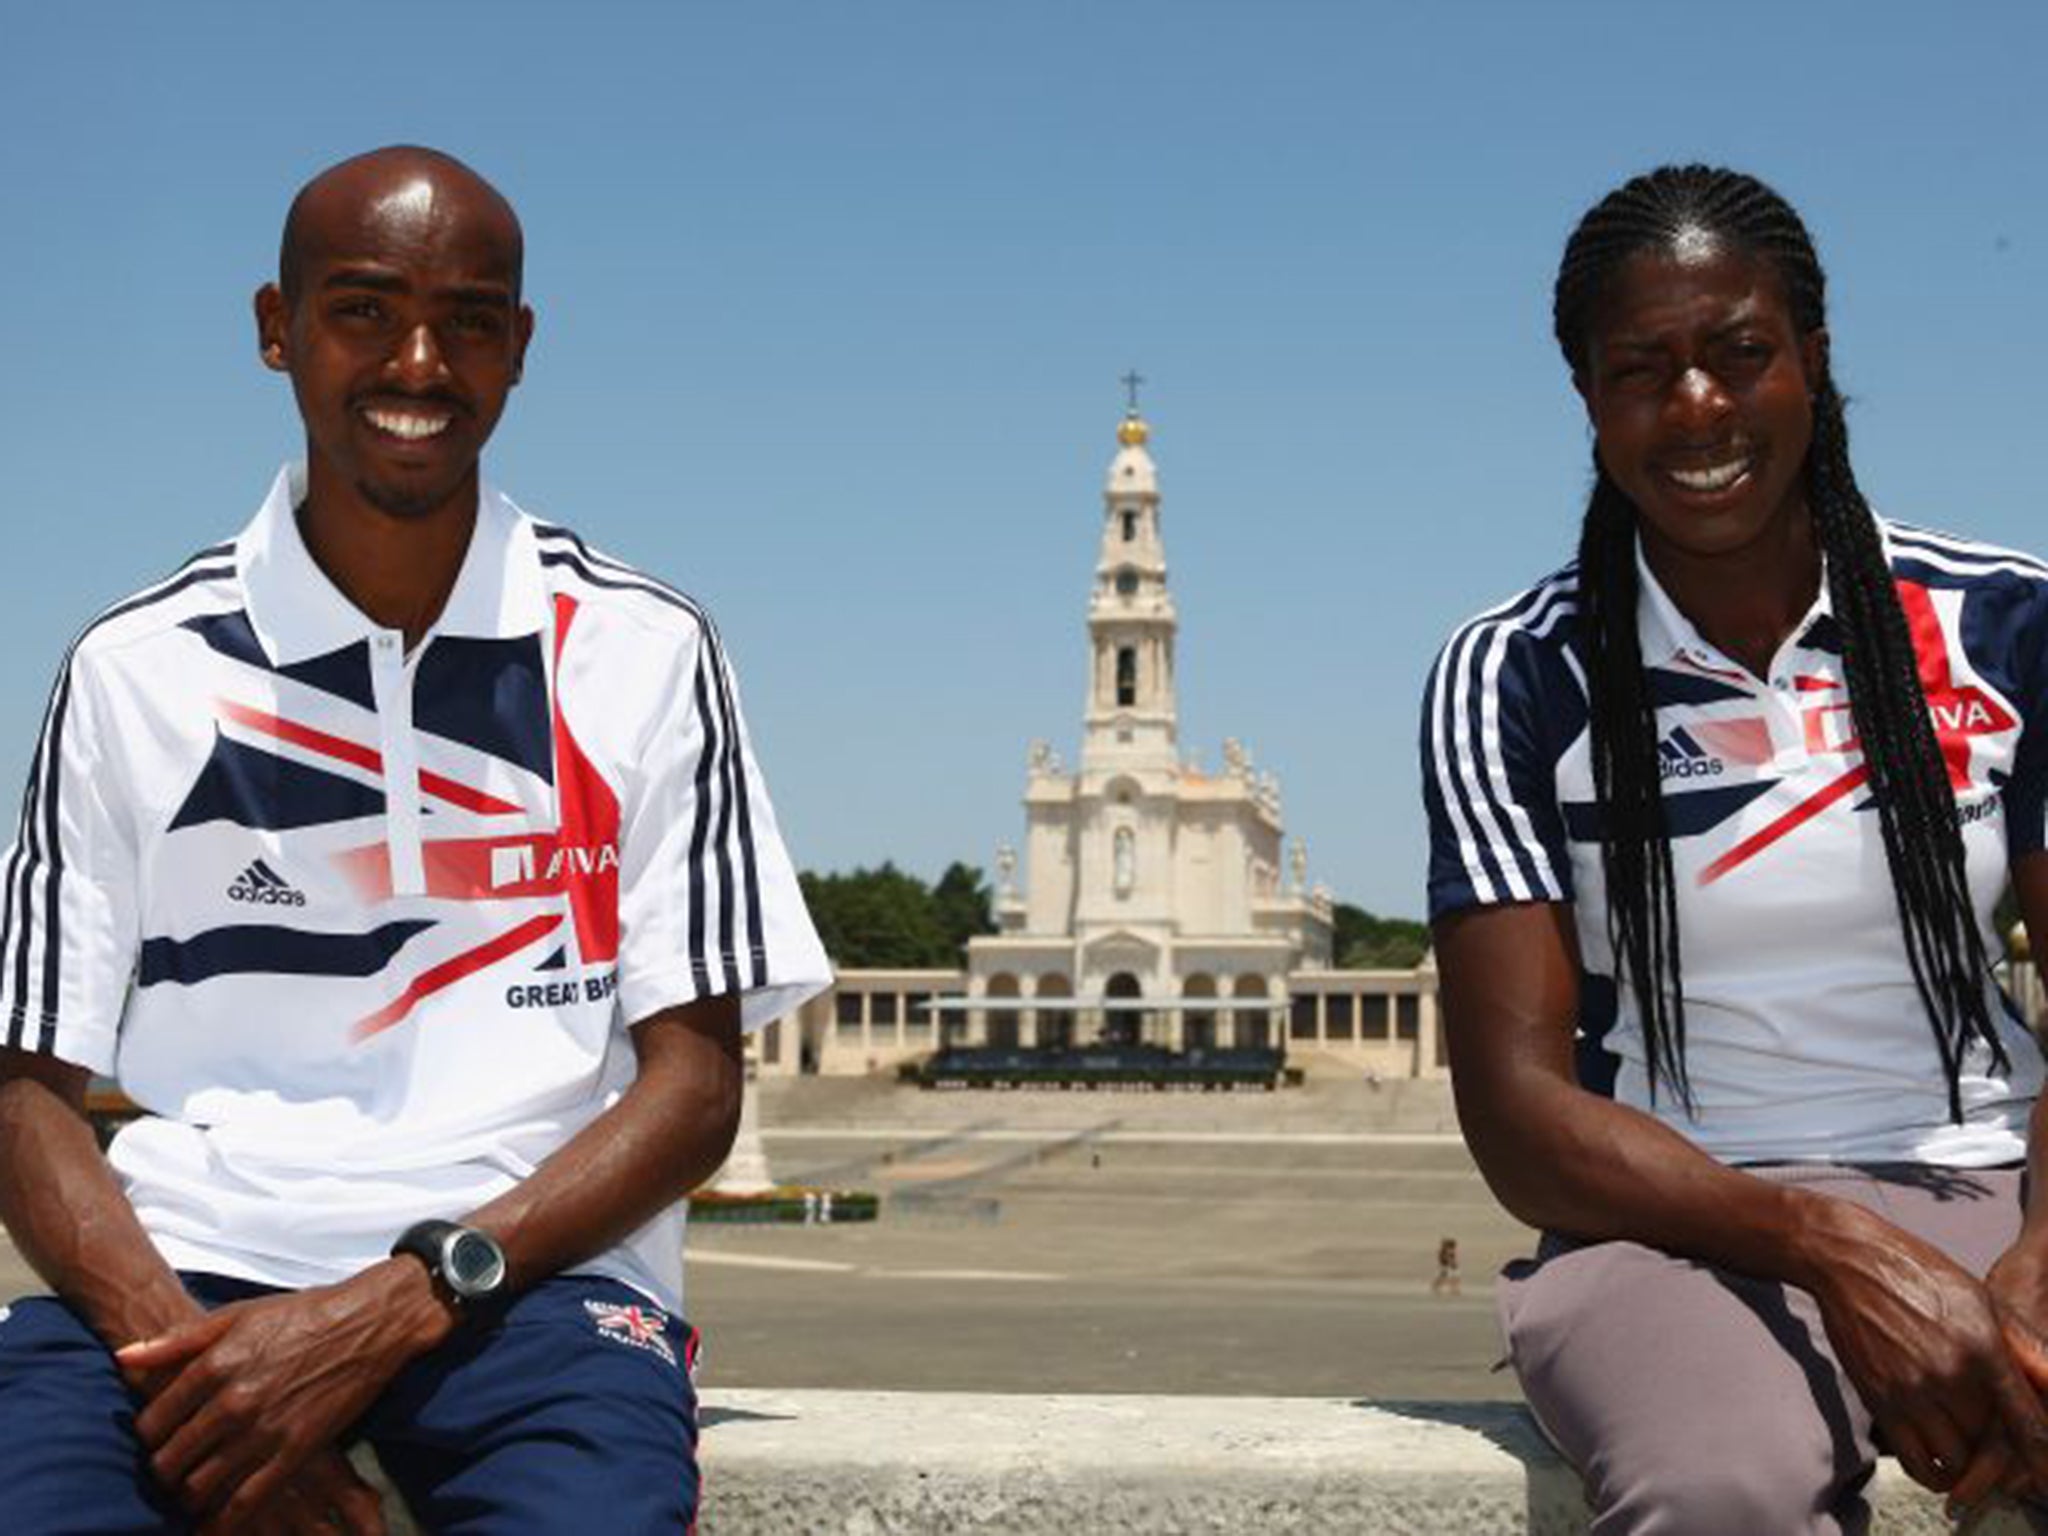 Farah and Christine Ohuruogu in happier times with the Great Britain team